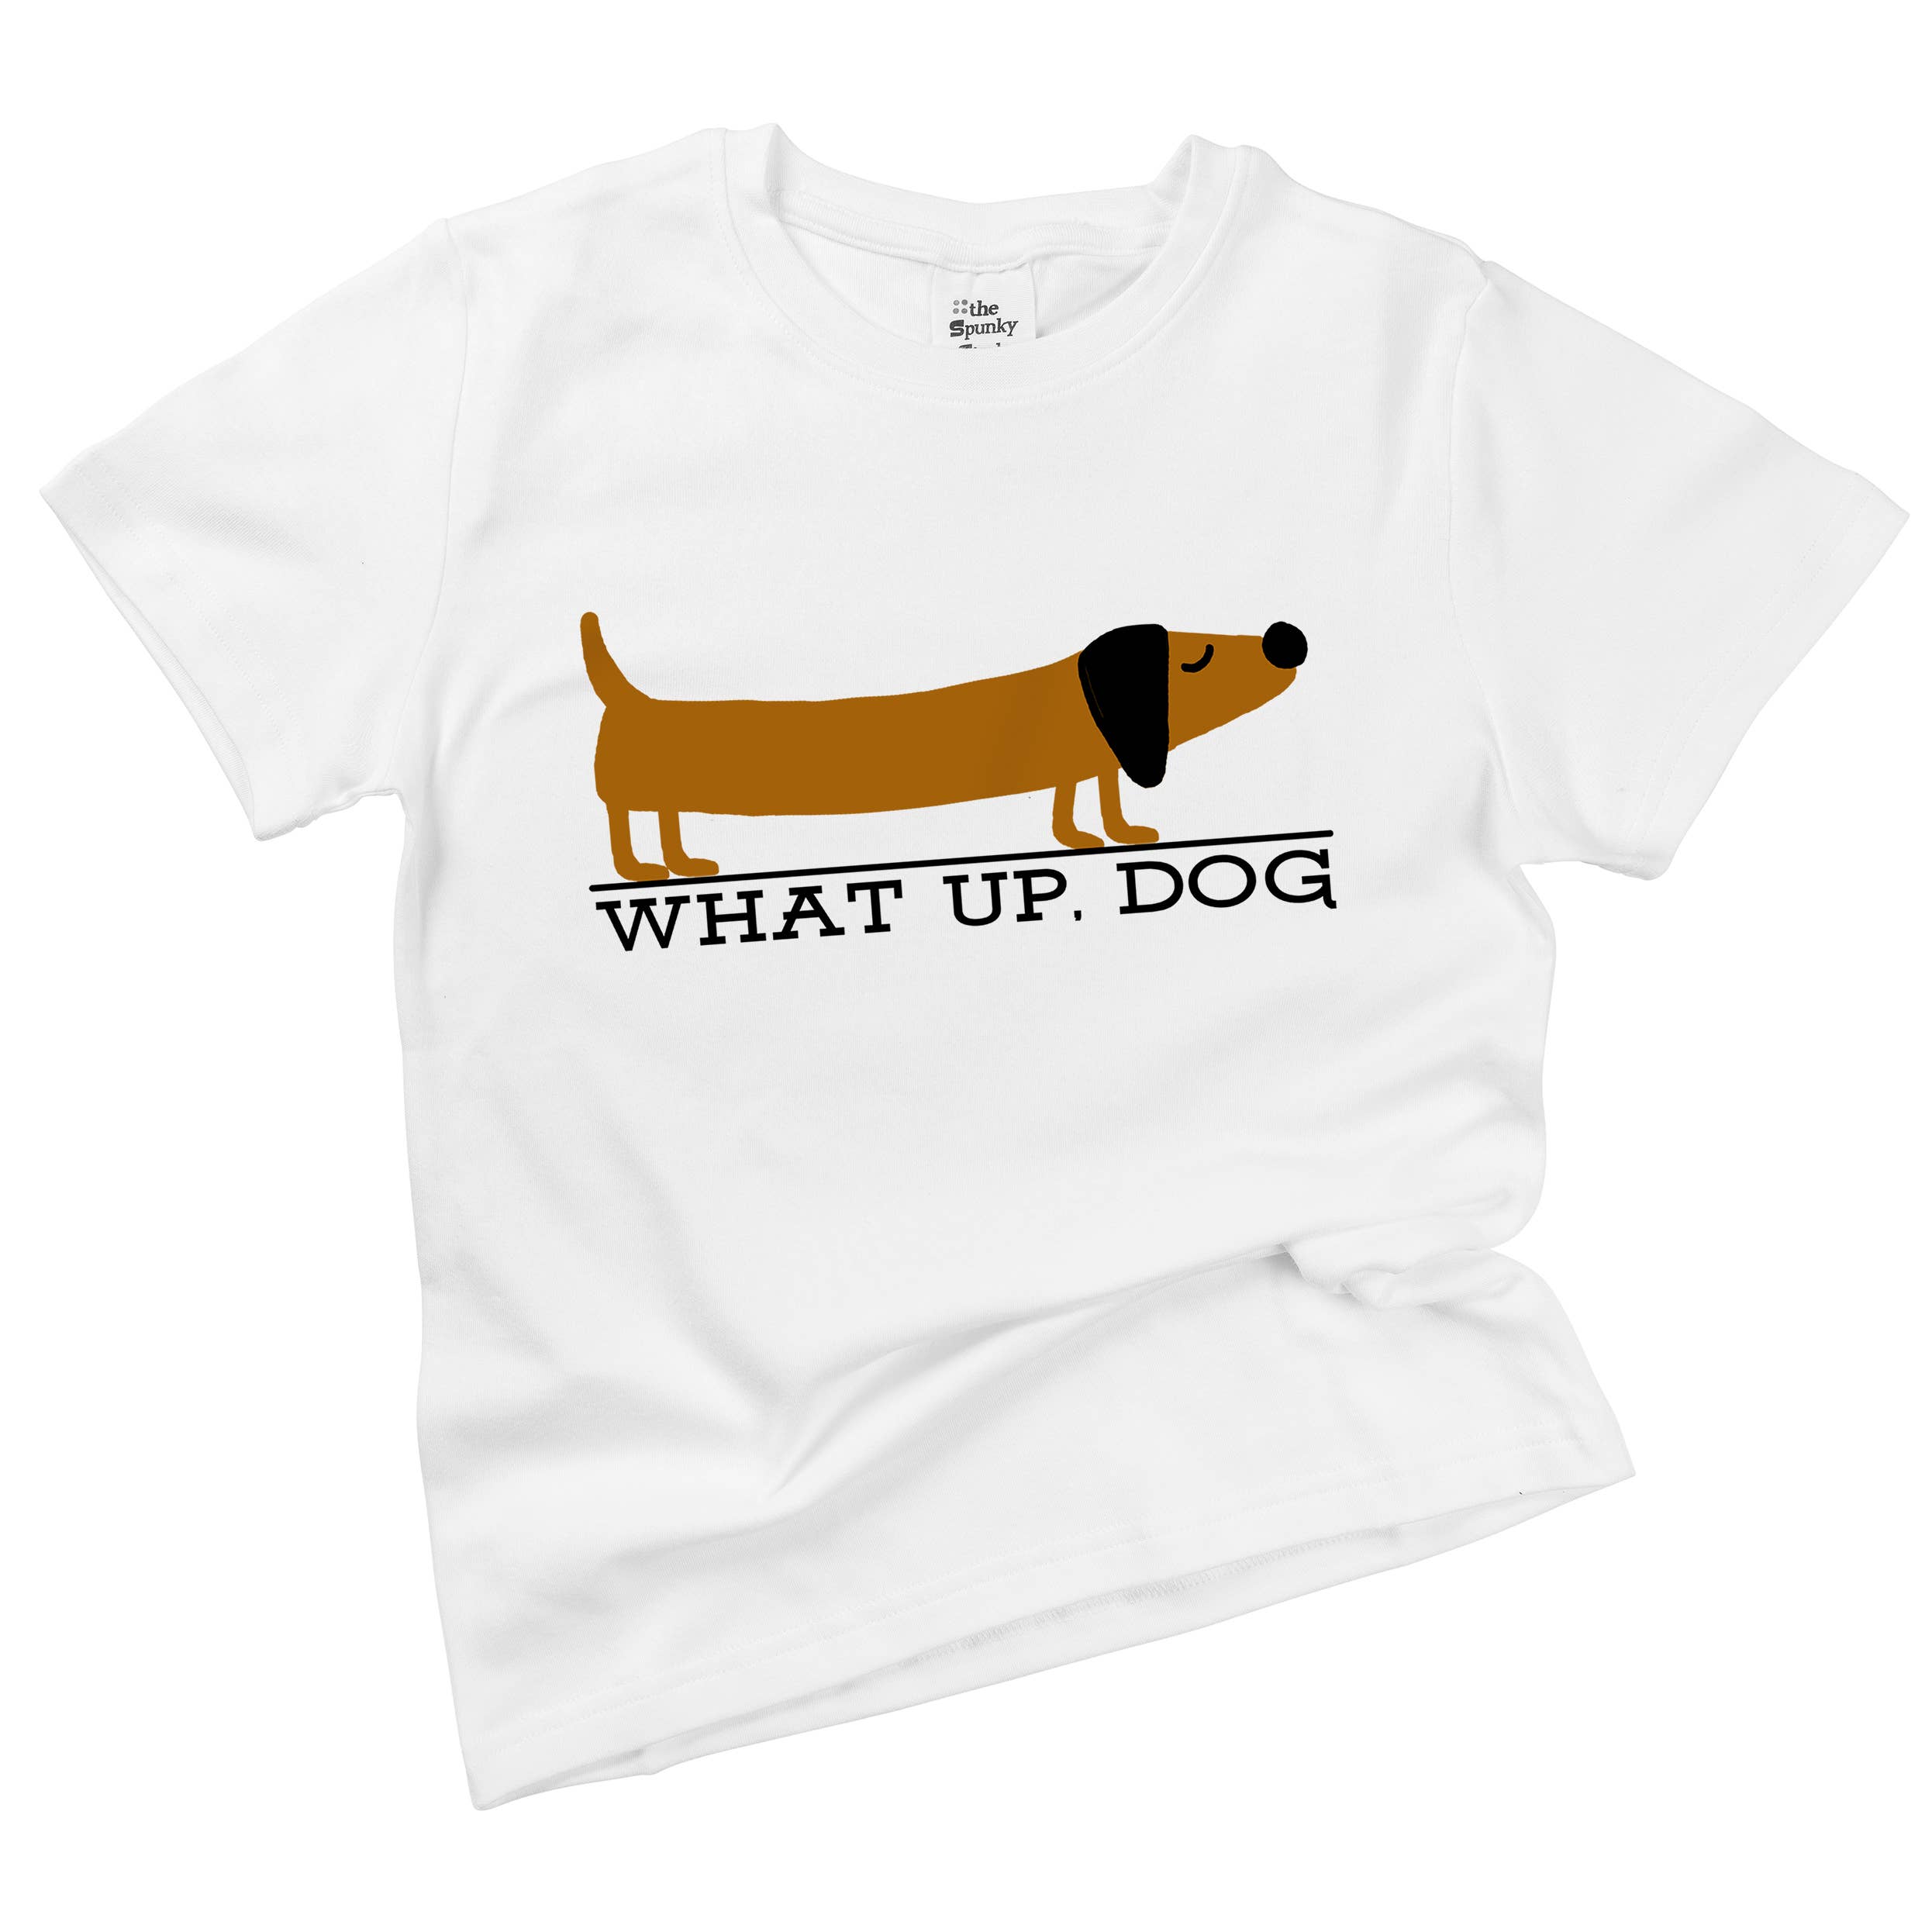 What Up Dog? Organic Cotton Baby Bodysuit and Toddler Shirt